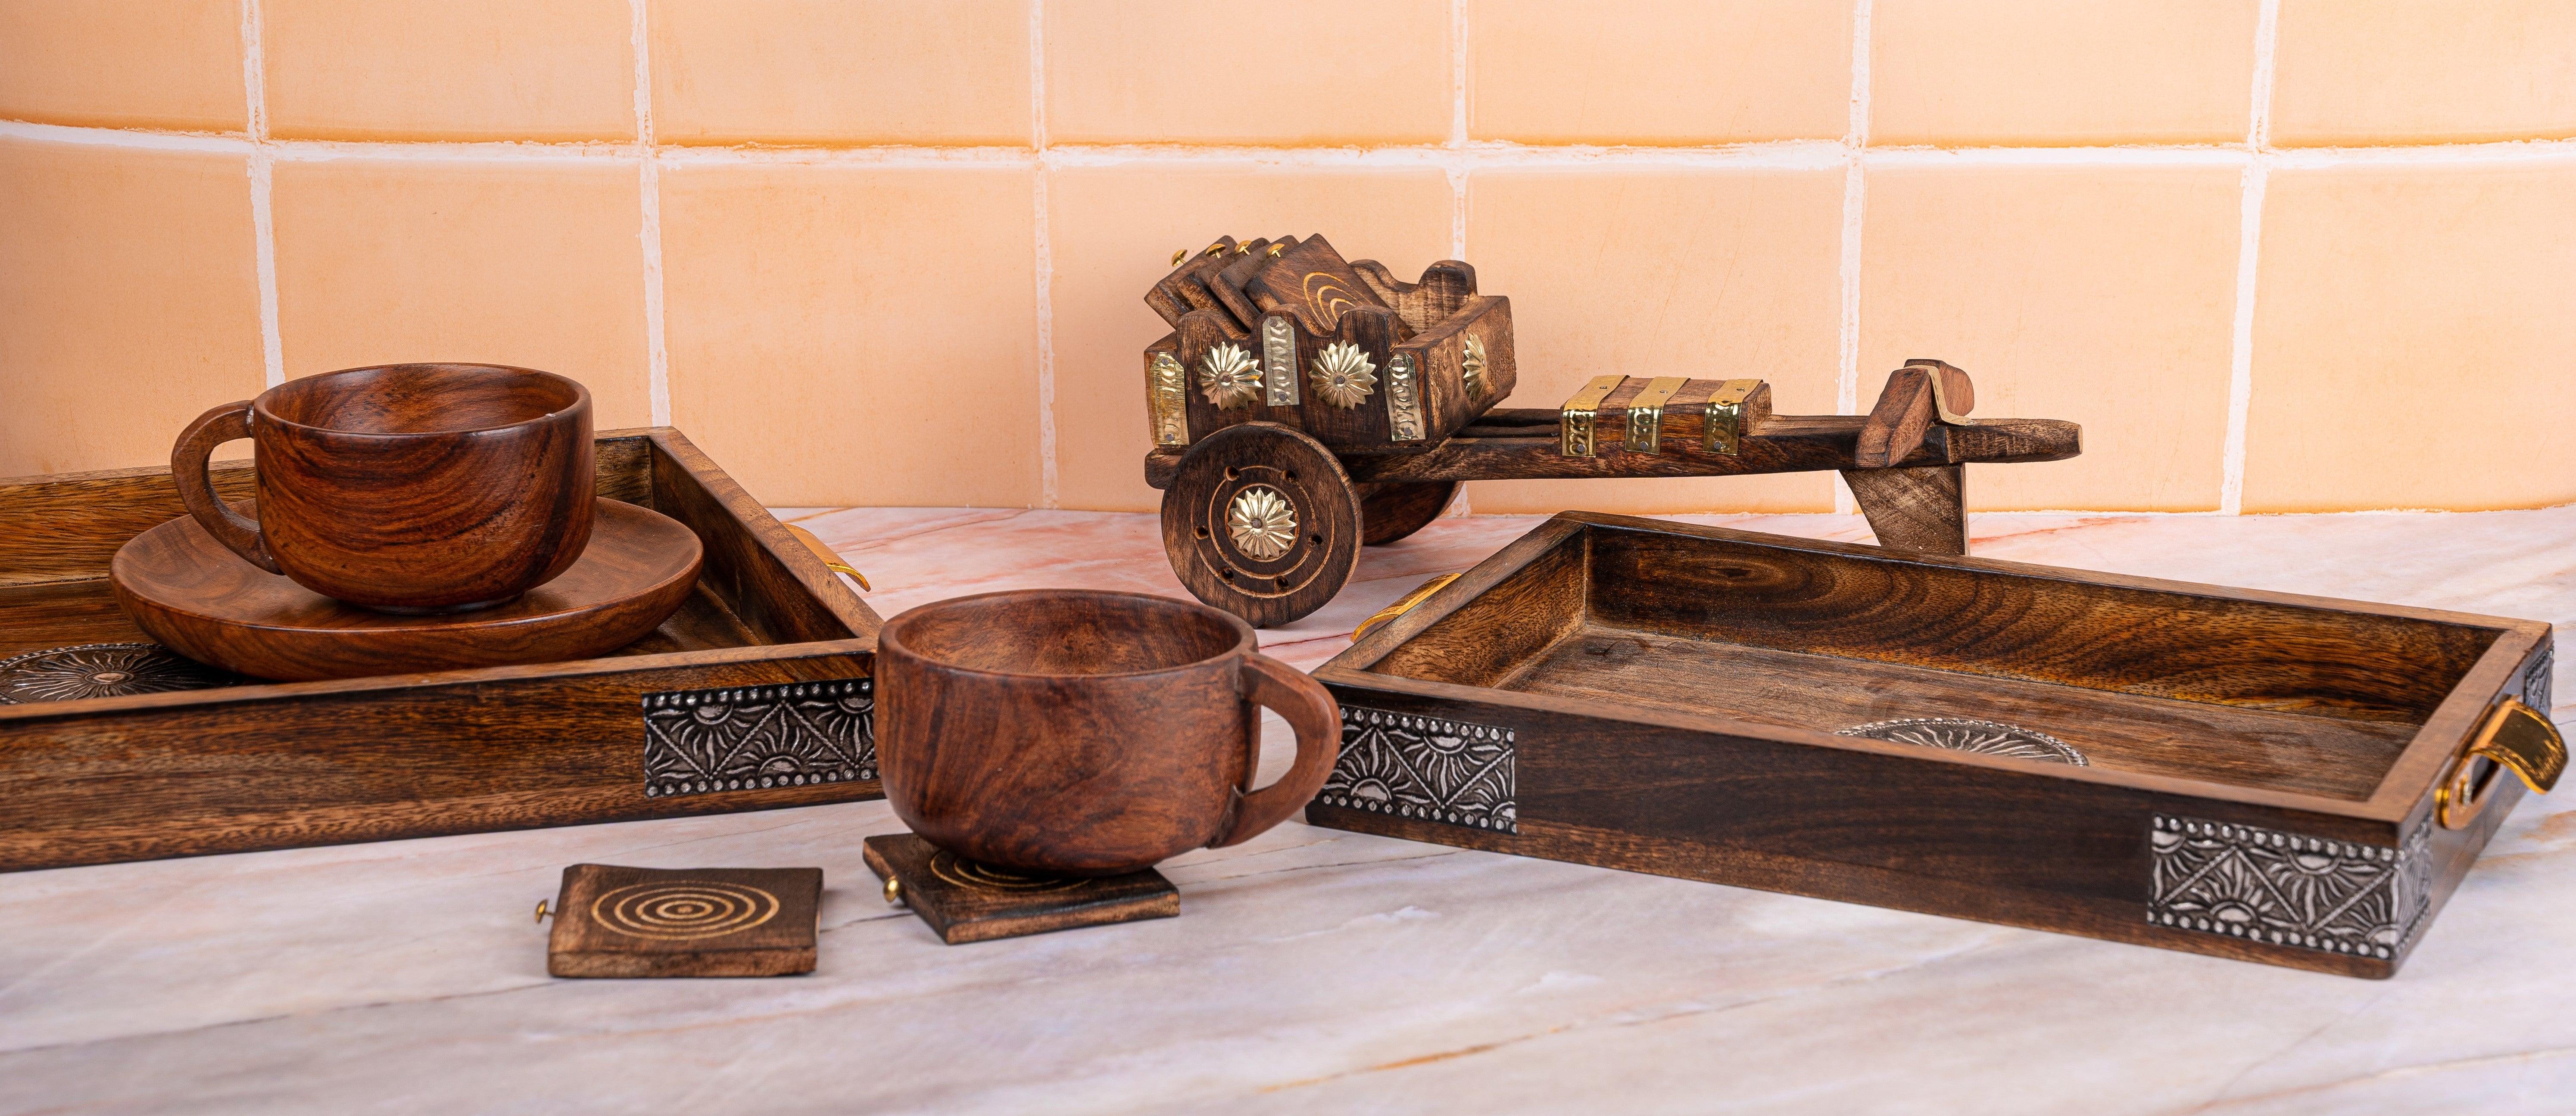 Wooden Drink Coaster, Rustic Coasters ,Carving Coasters, 4 Pcs, 4 x4 inch  at Rs 149/piece, Wood Resin Coasters in Saharanpur